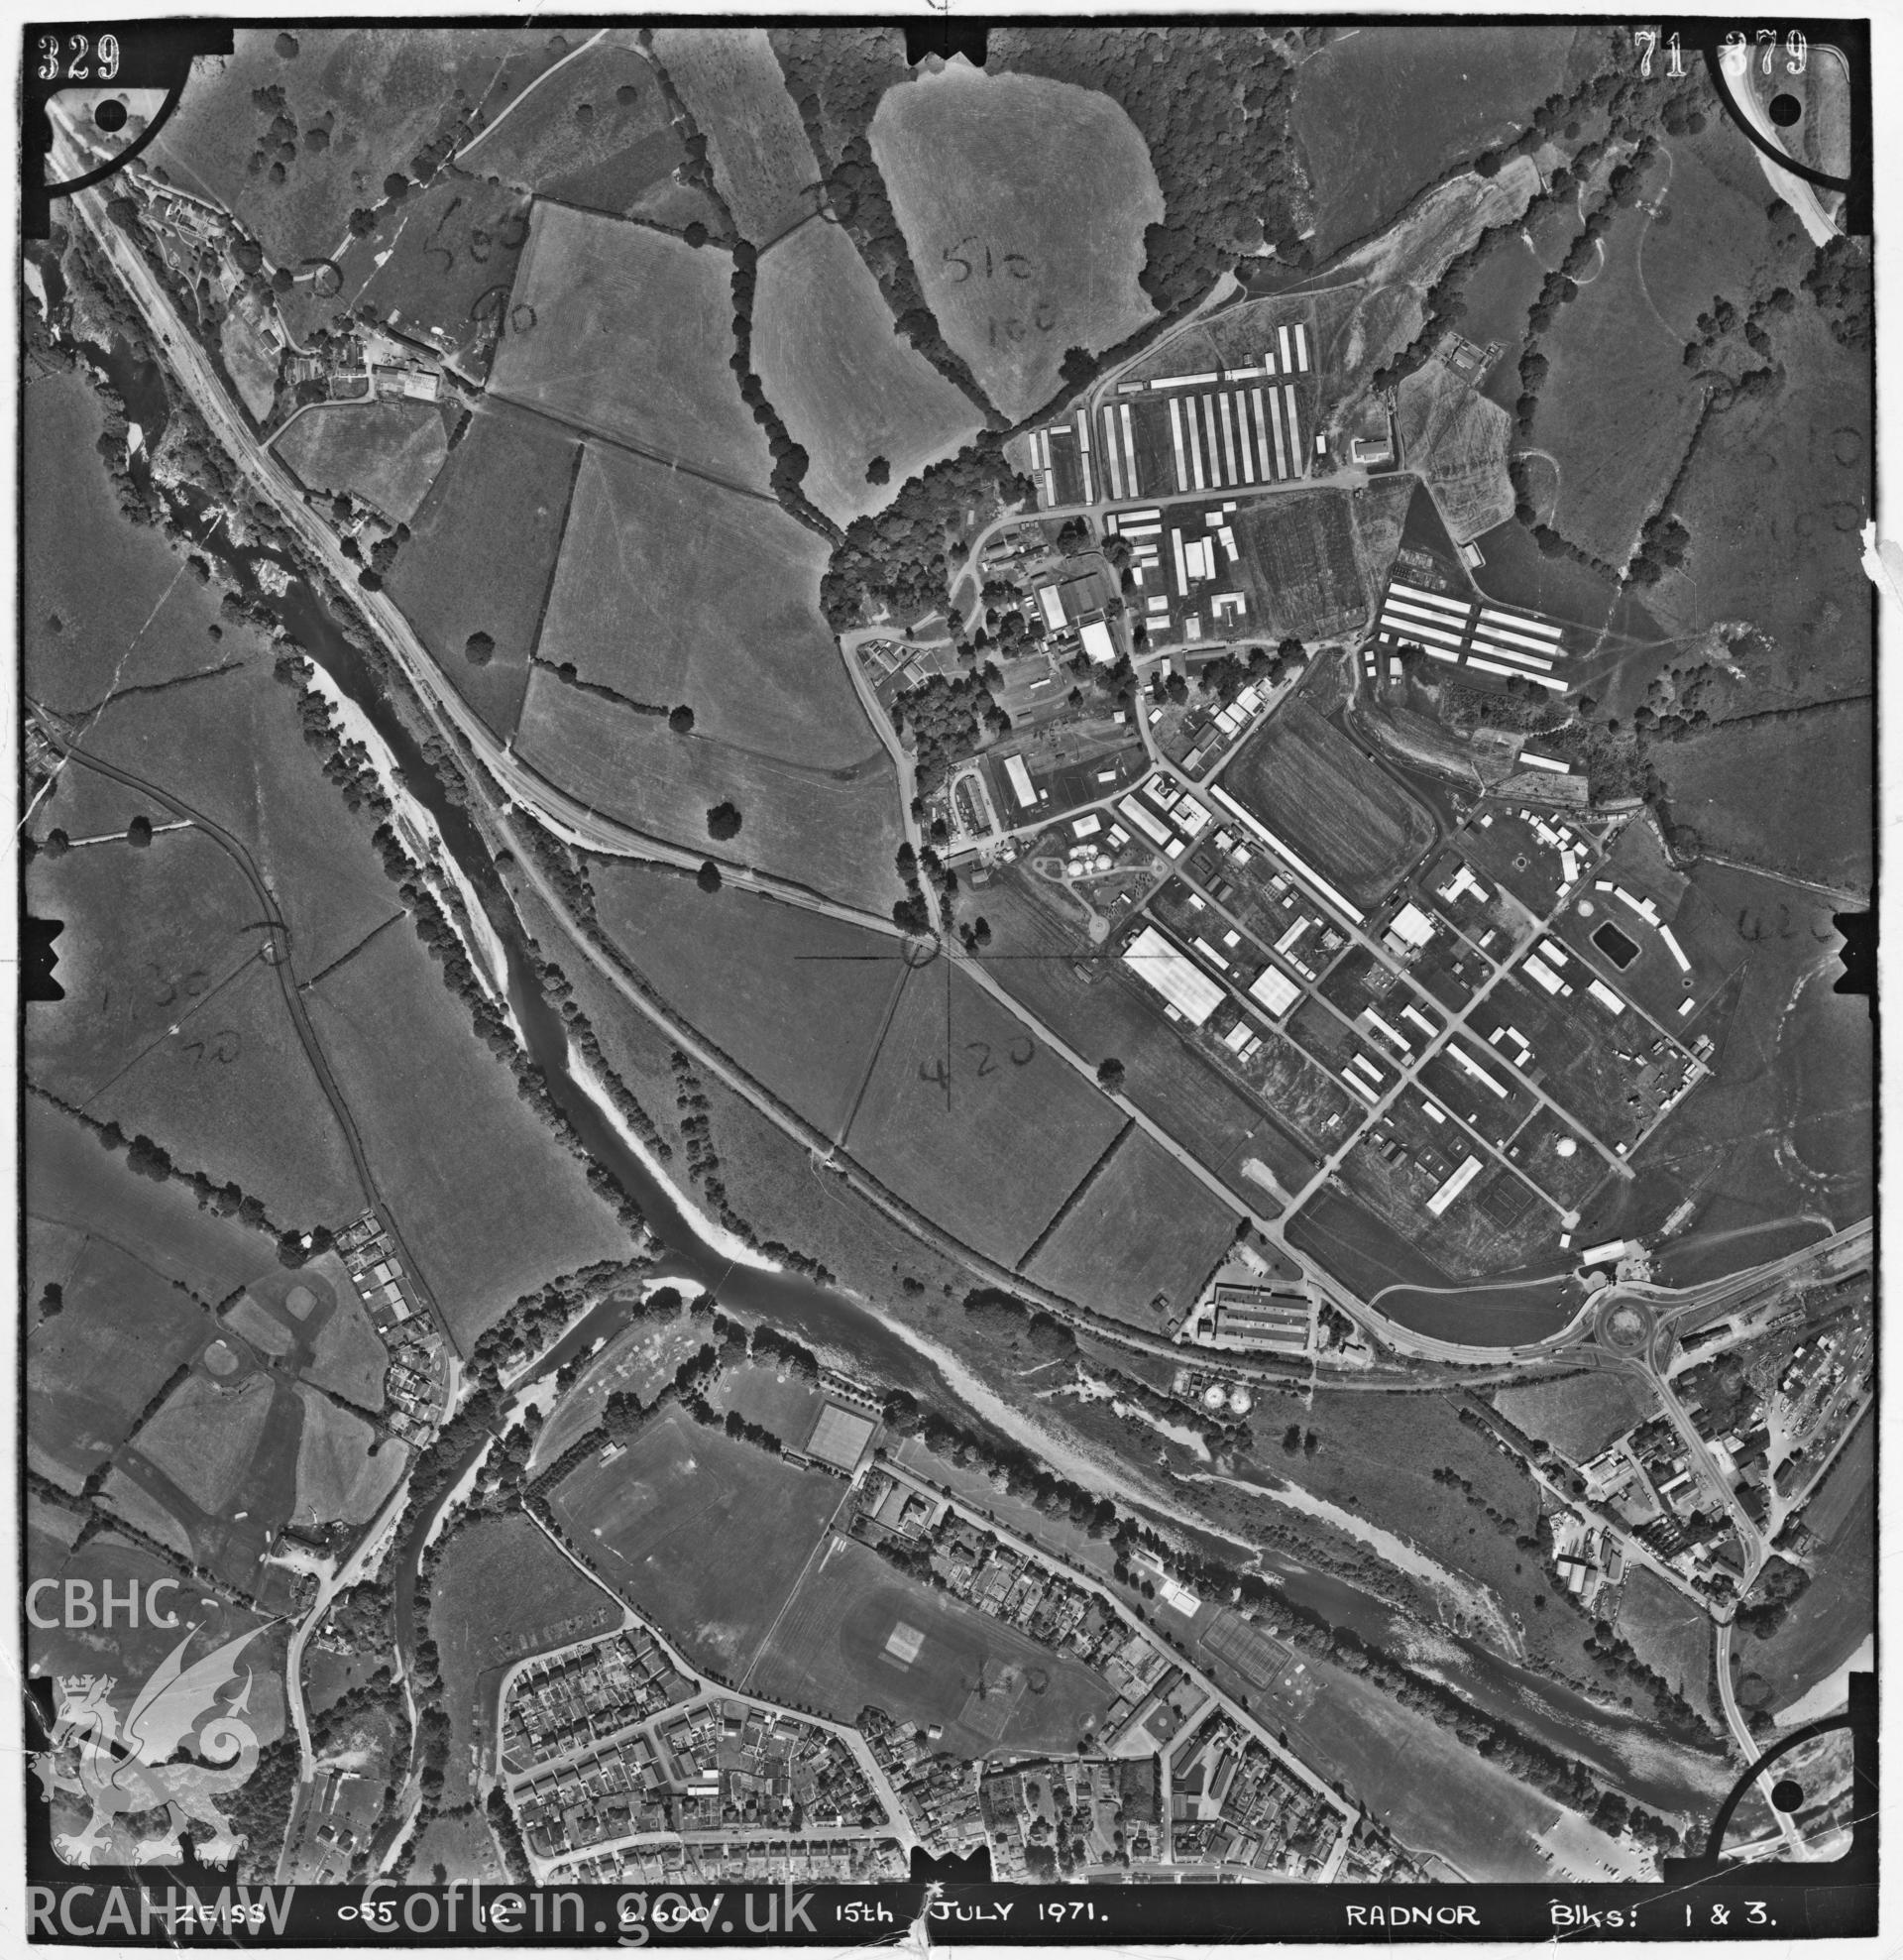 Digitized copy of an aerial photograph showing the area around Builth Wells, taken by Ordnance Survey, 1971.